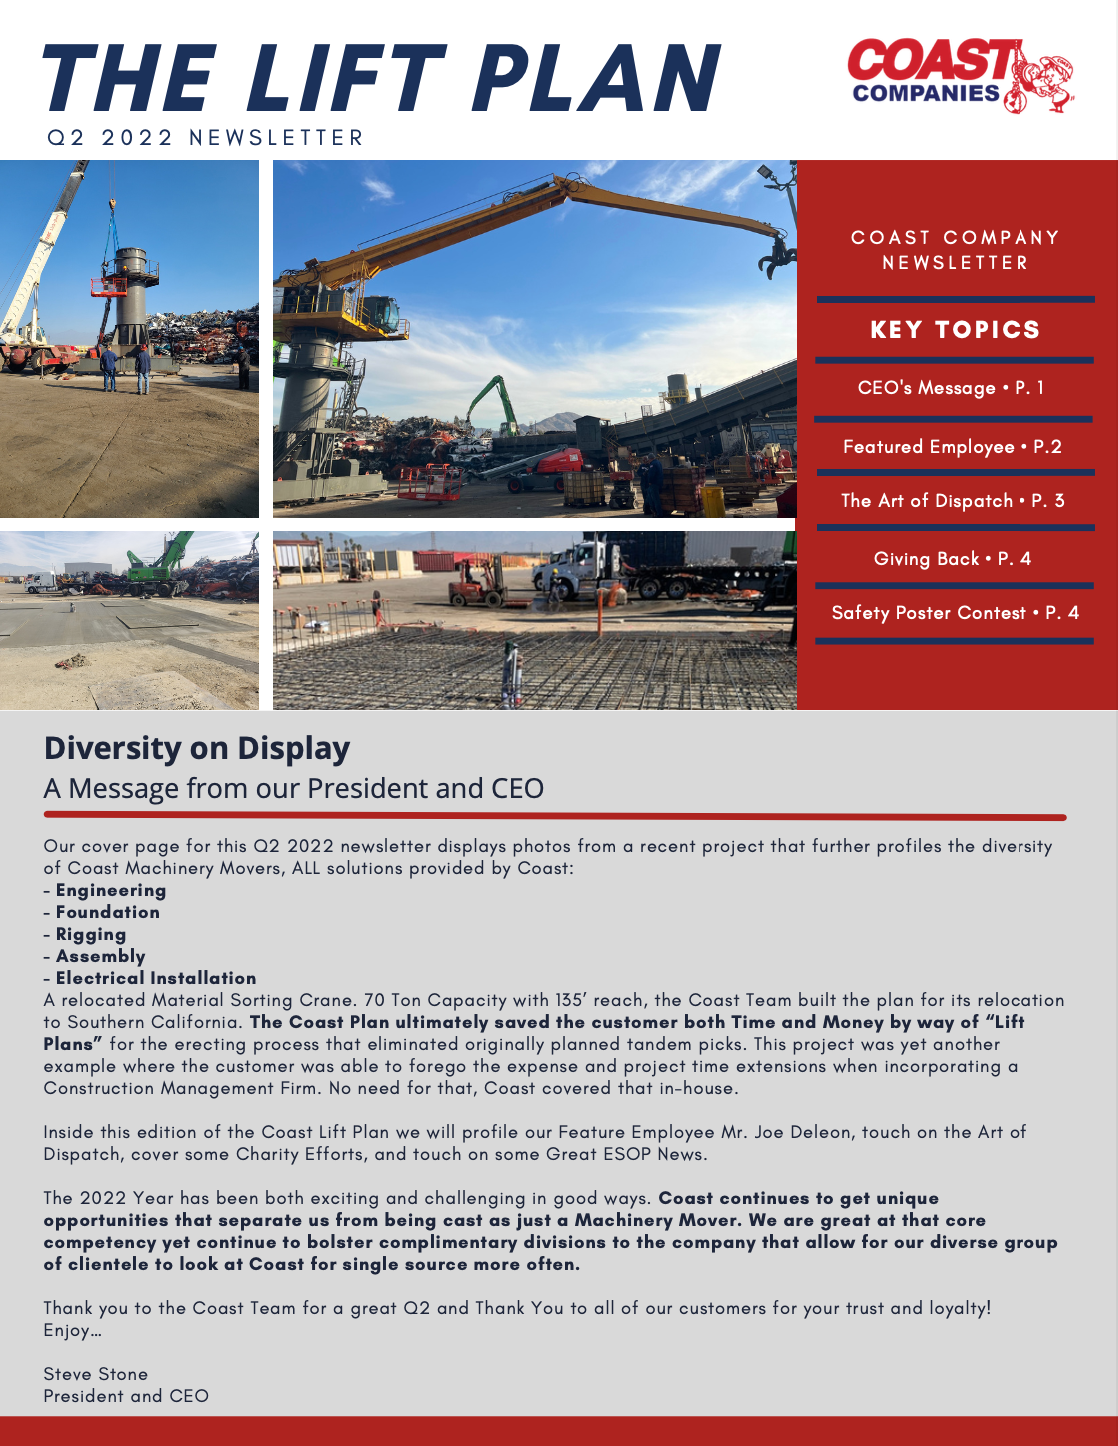 Q2 2022: The Lift Plan Newsletter - Coast Machinery Movers